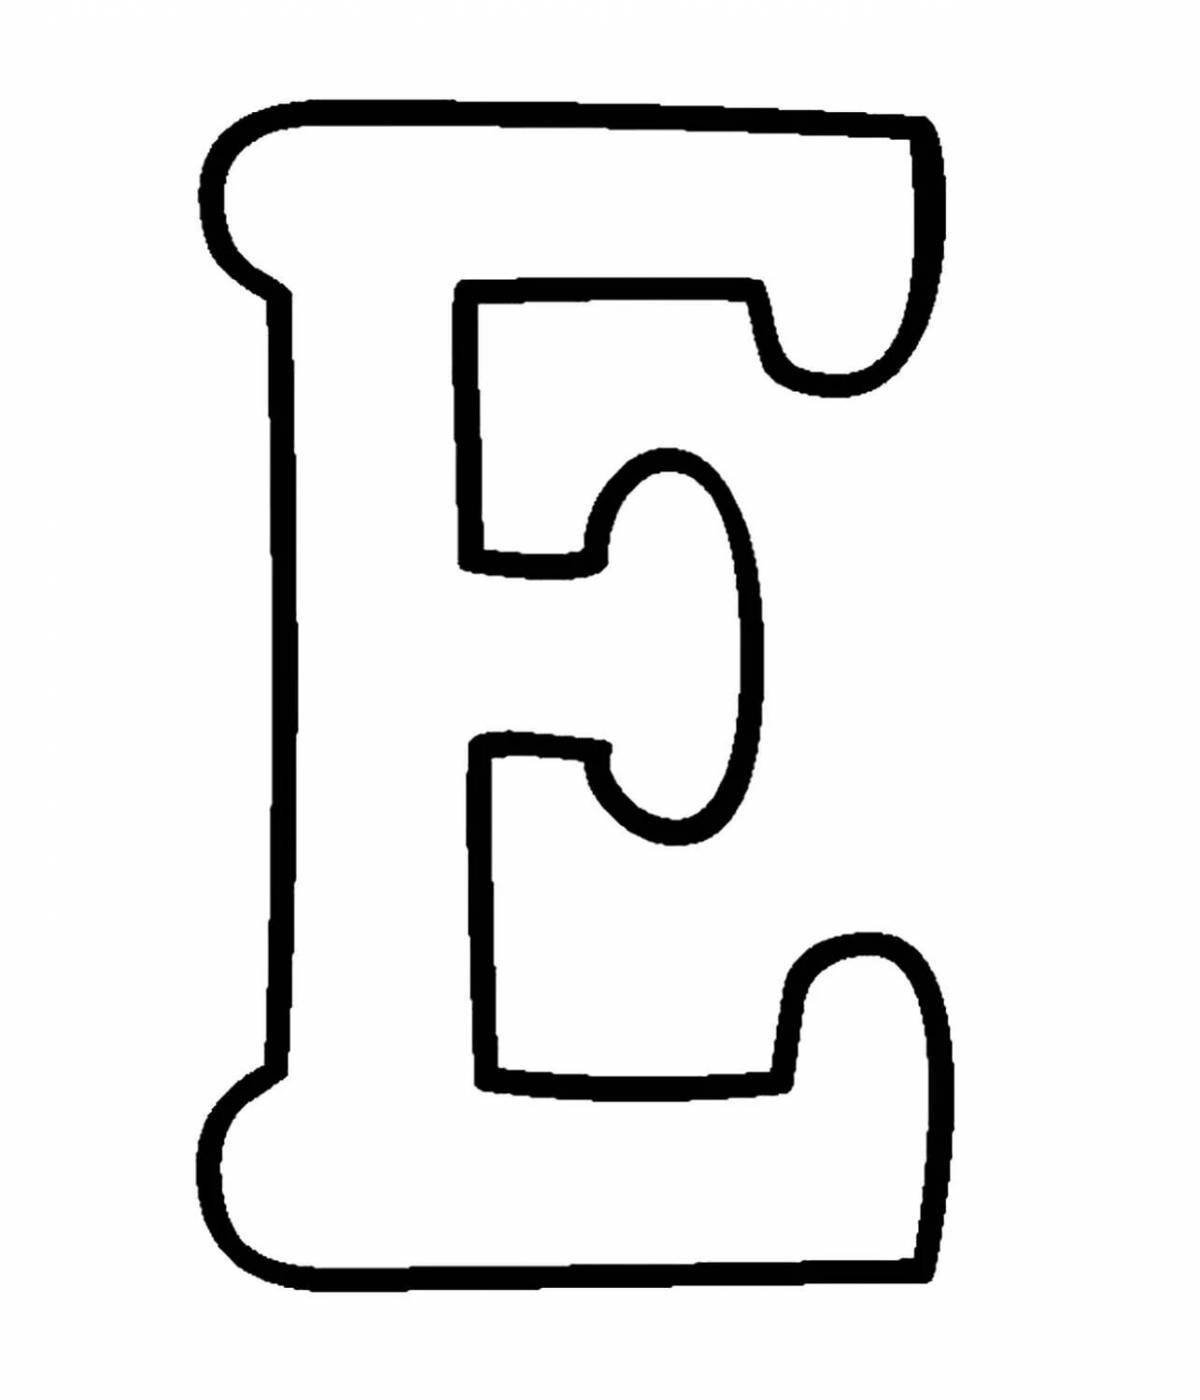 Colourful letter e coloring book for little ones